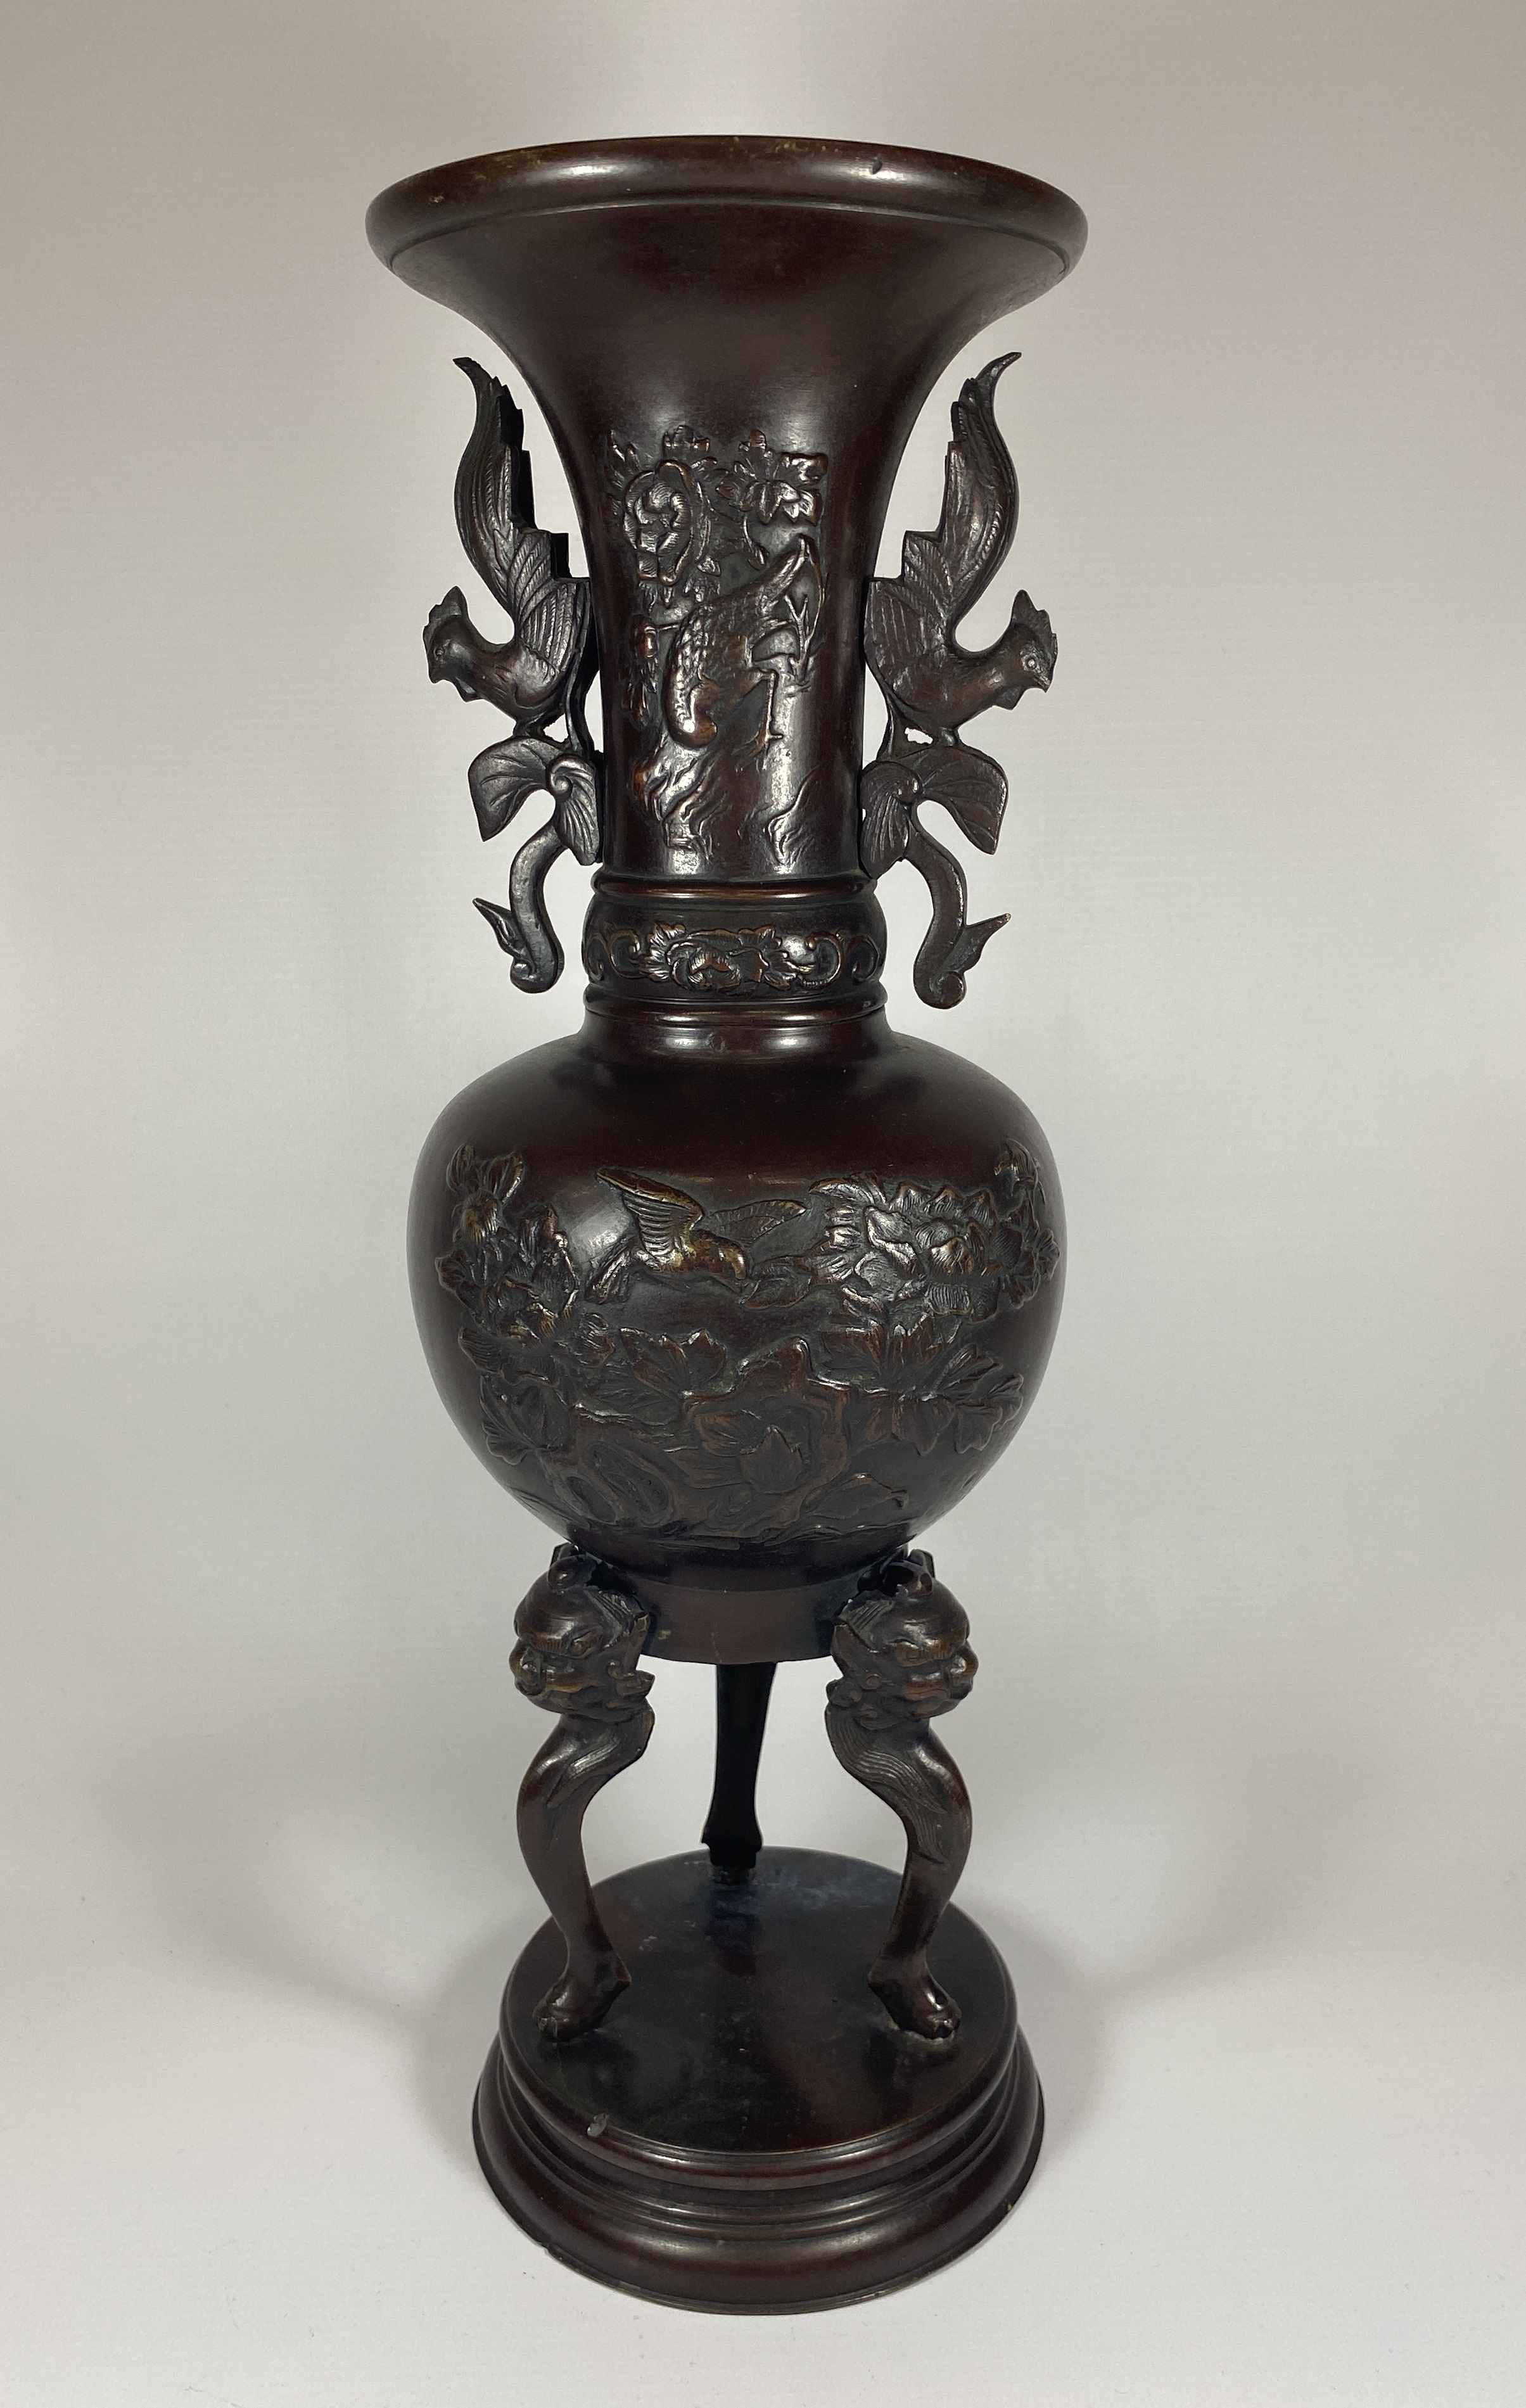 A PAIR OF LARGE JAPANESE MEIJI PERIOD (1868-1912) BRONZE VASE WITH TRIPOD LEGS ON BASE, HEIGHT 43CM - Image 2 of 6